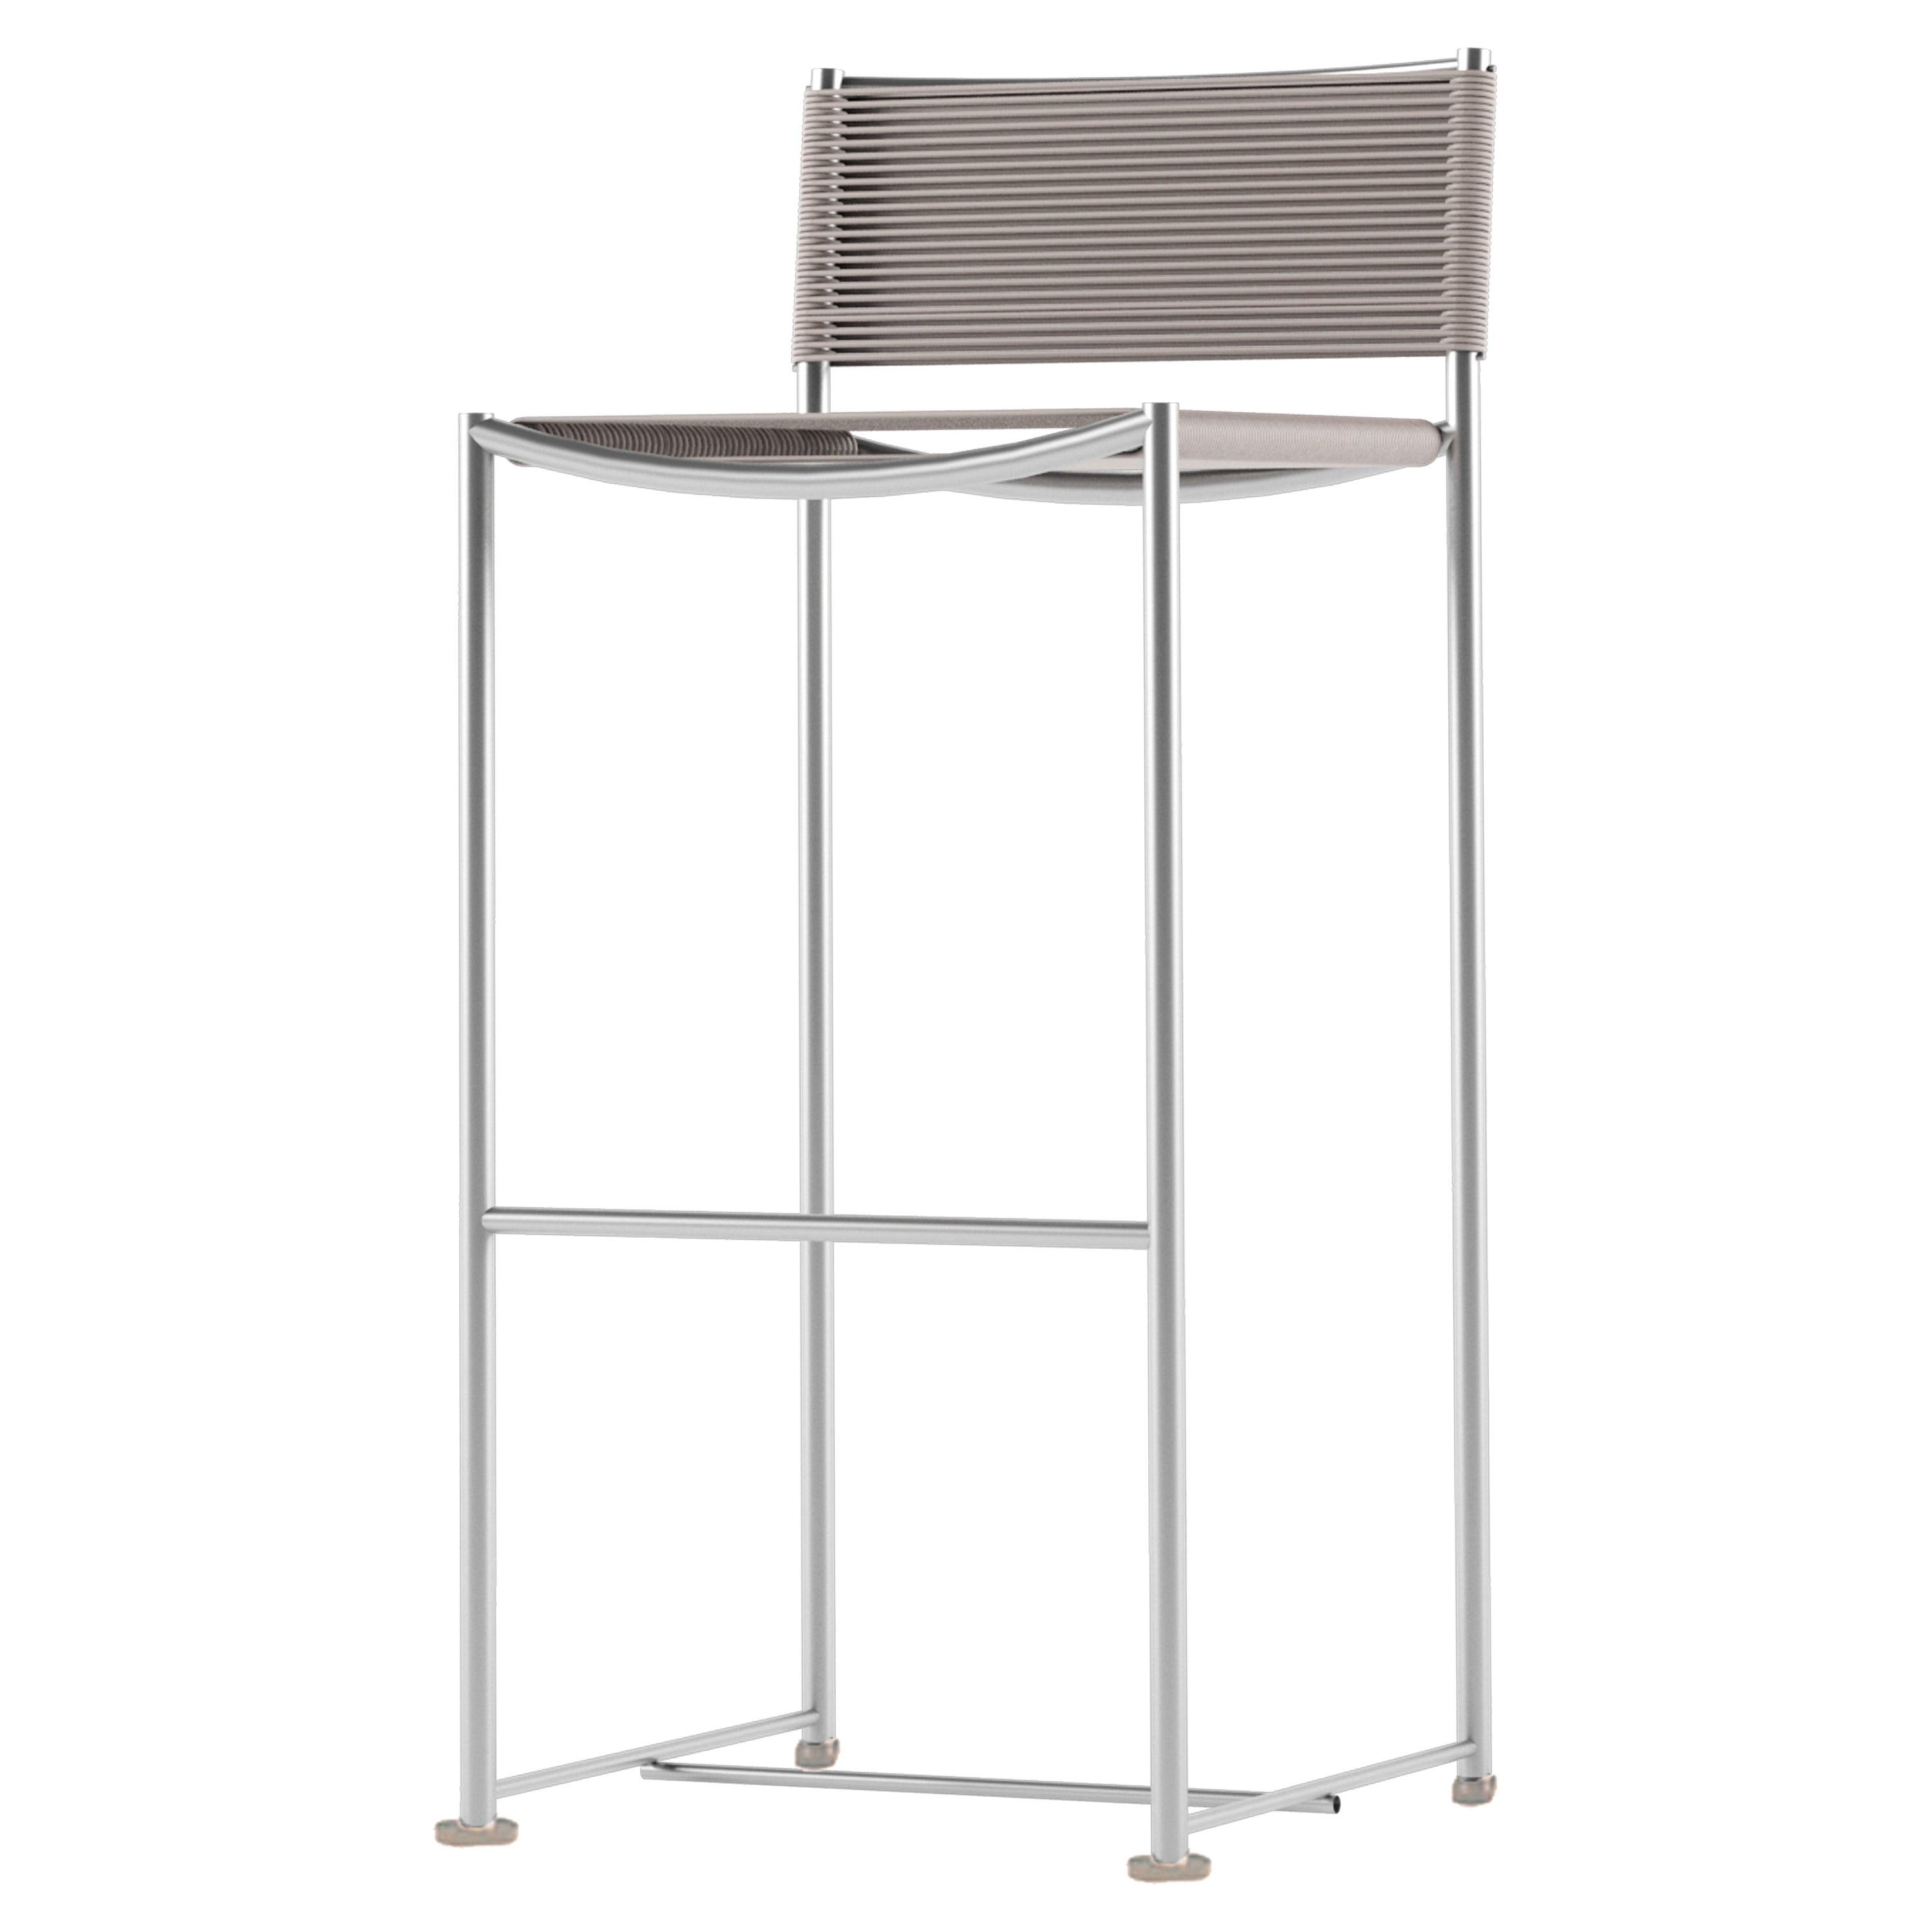 Alias 205_O Green PVC Outdoor High Stool in Beige with Steel Frame For Sale